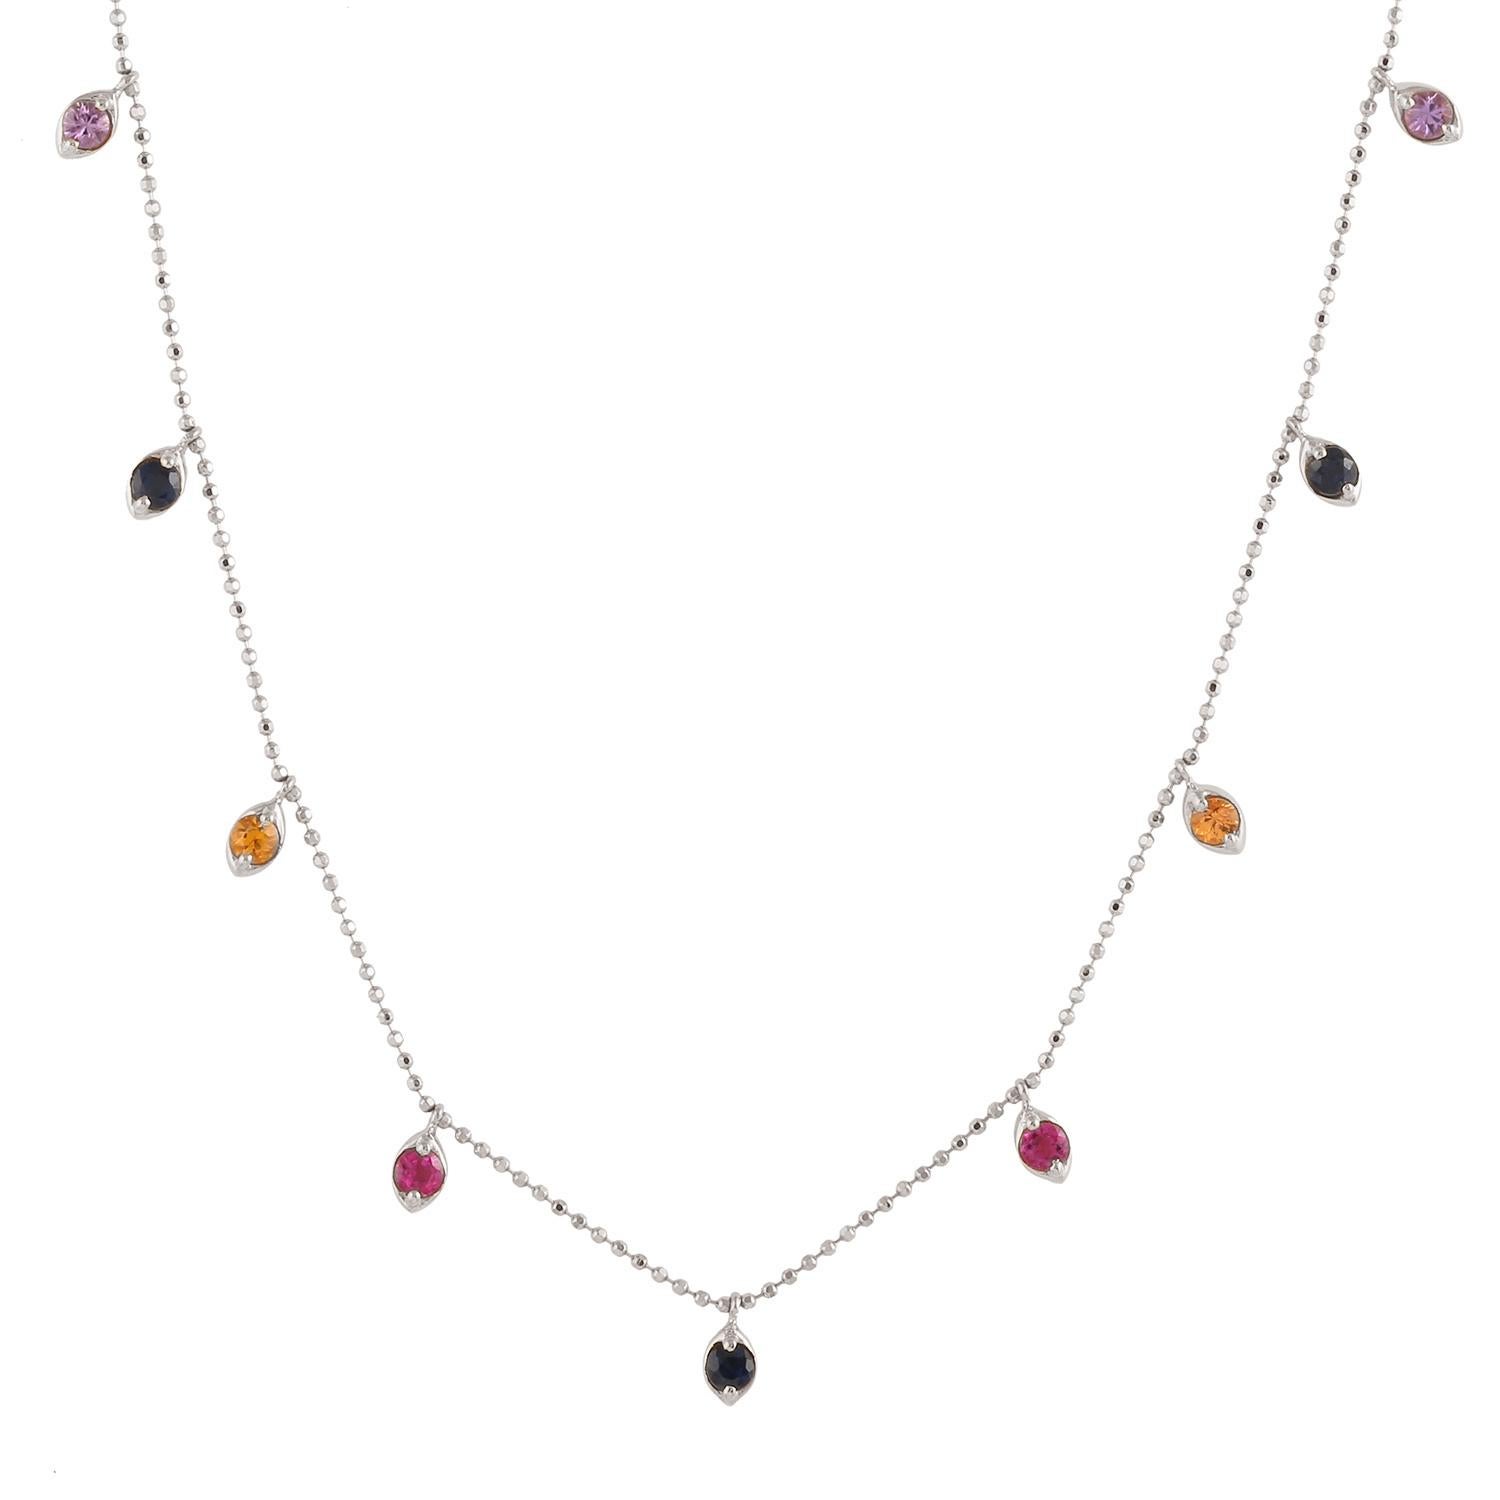 Women's Multi Colored Sapphire Chain Necklace Made In 18k White Gold For Sale